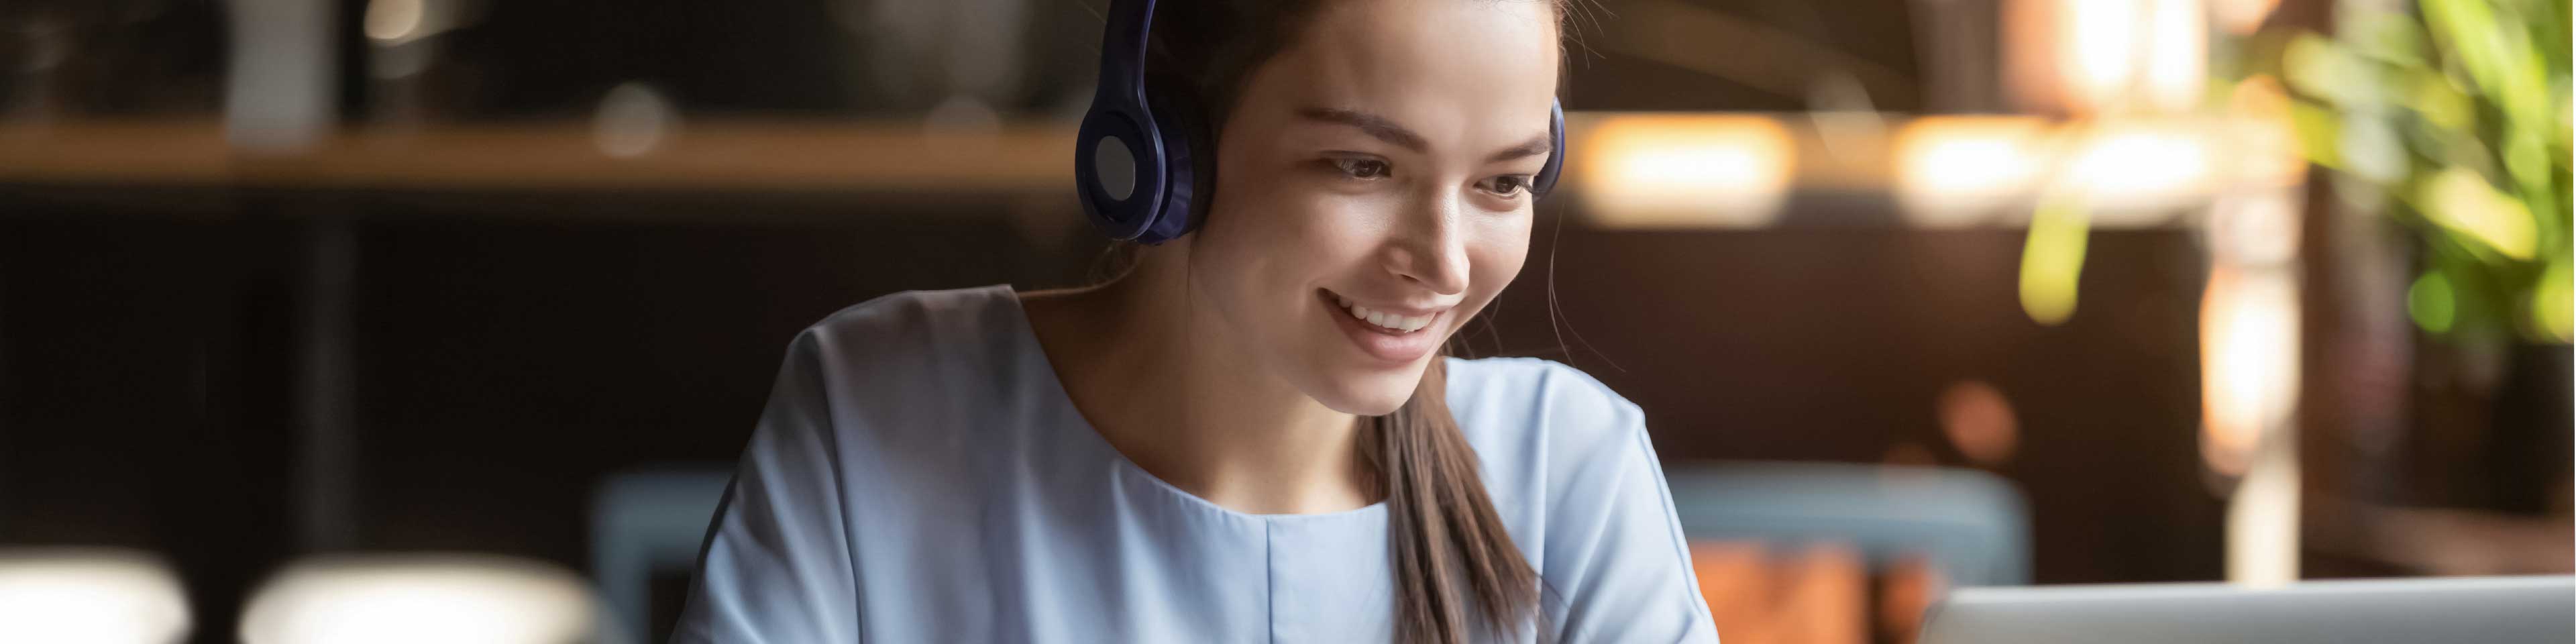 brunette with headset on smiling